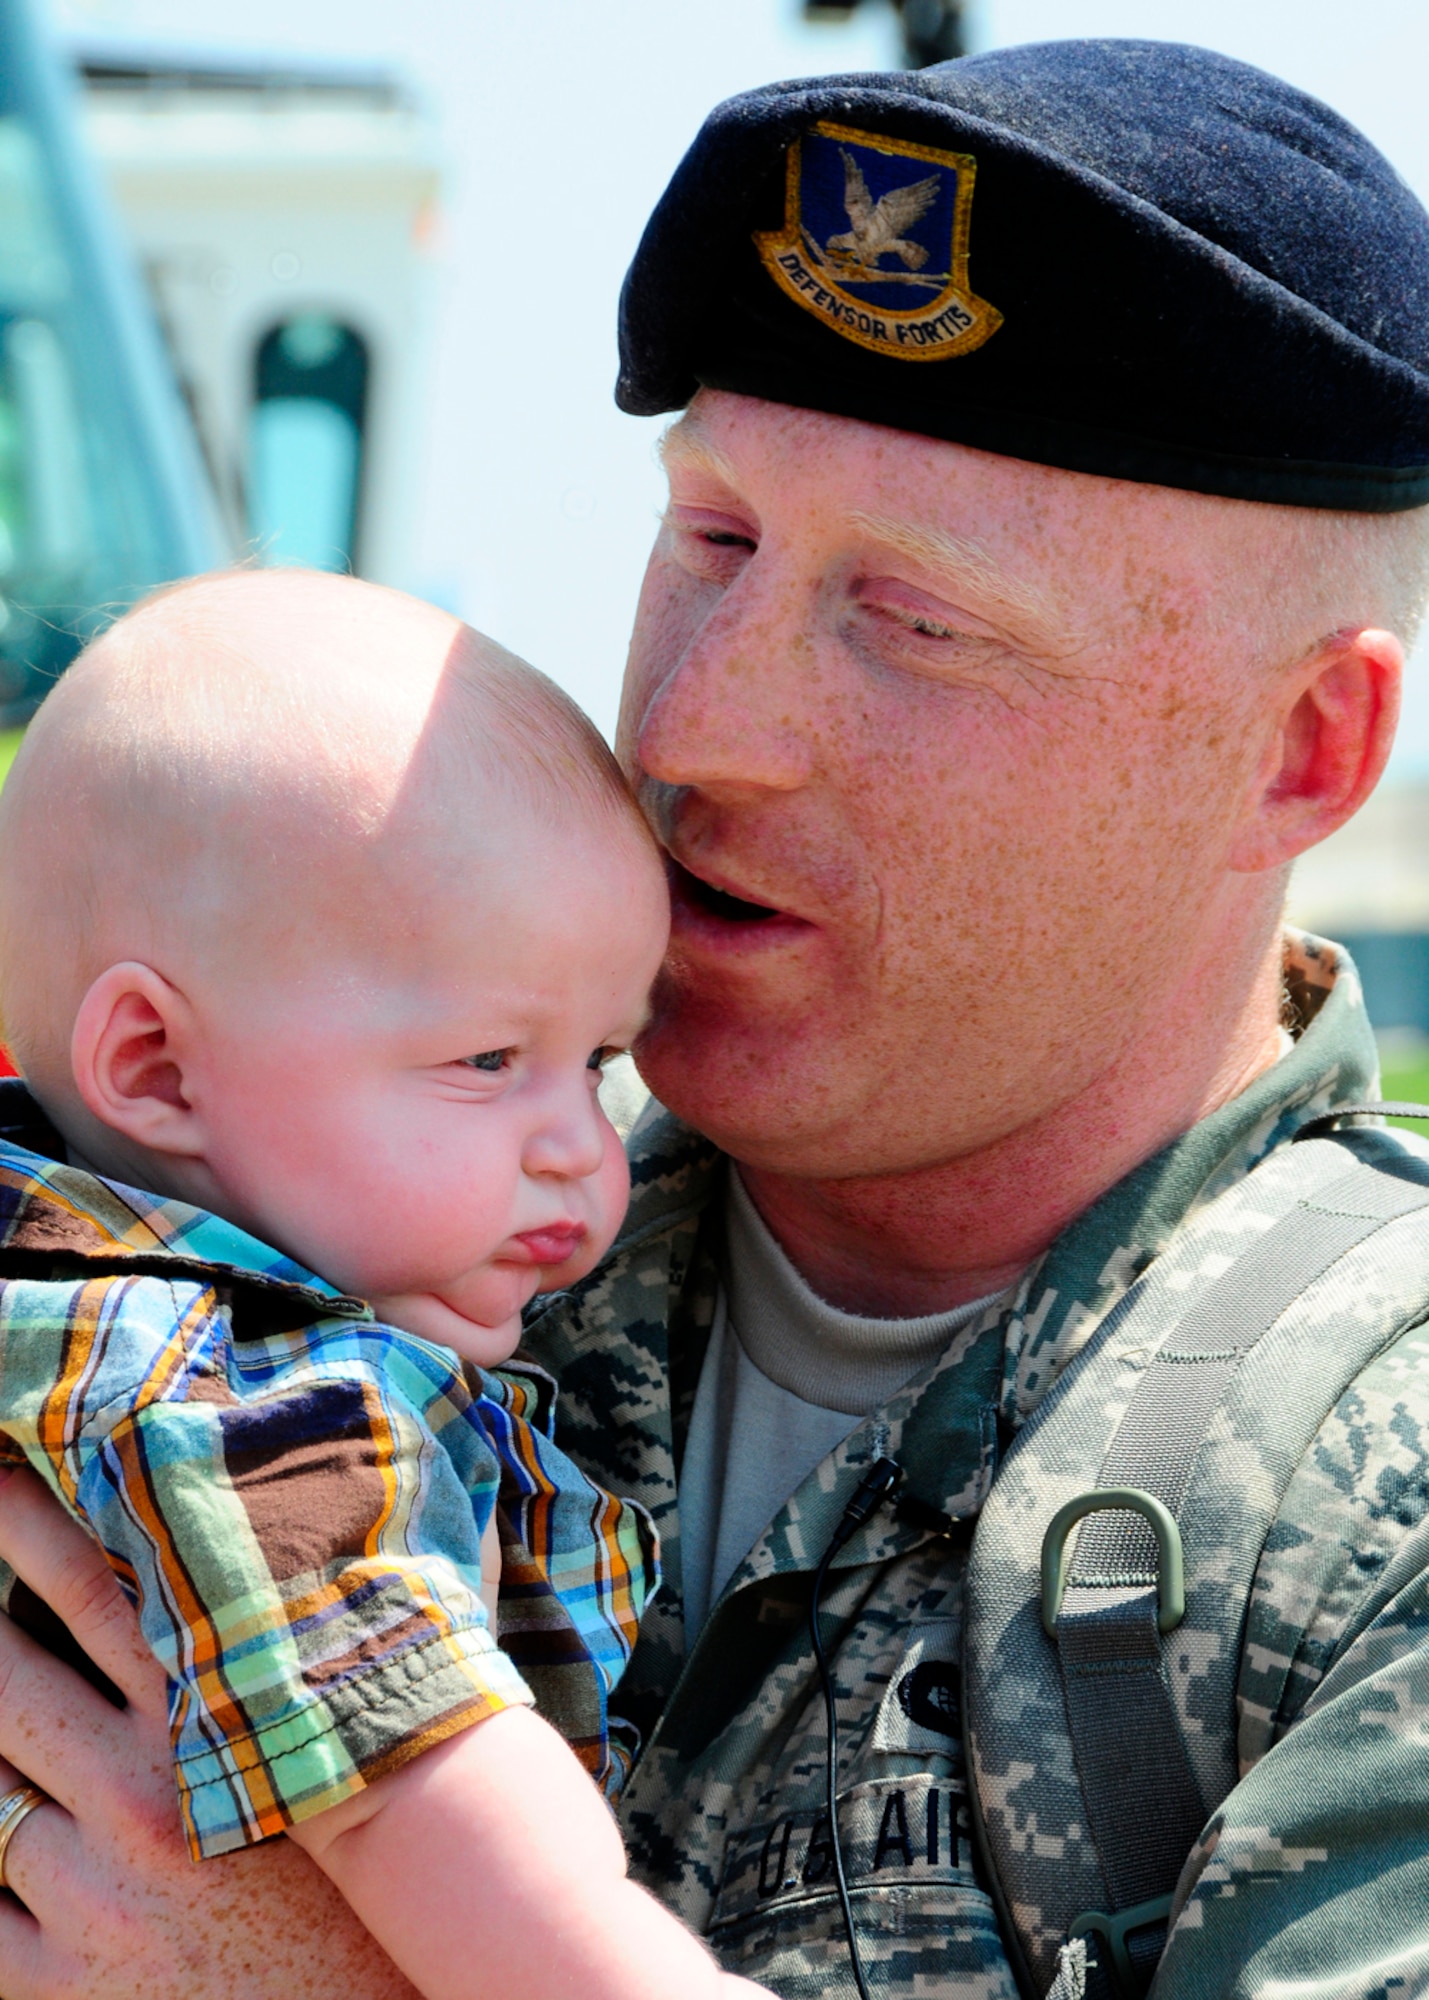 Master Sgt. Stan Drozdowski holds his son Talon Drozdowski for the very first time after returning from a six-month deployment to Iraq.  Drozdowski is a member of the 134 ARW Security Forces Squadron at McGhee Tyson Air National Guard Base, Tennessee.  (US Air Force photo by Tech. Sgt. Kendra M Owenby, 134 ARW Public Affairs)